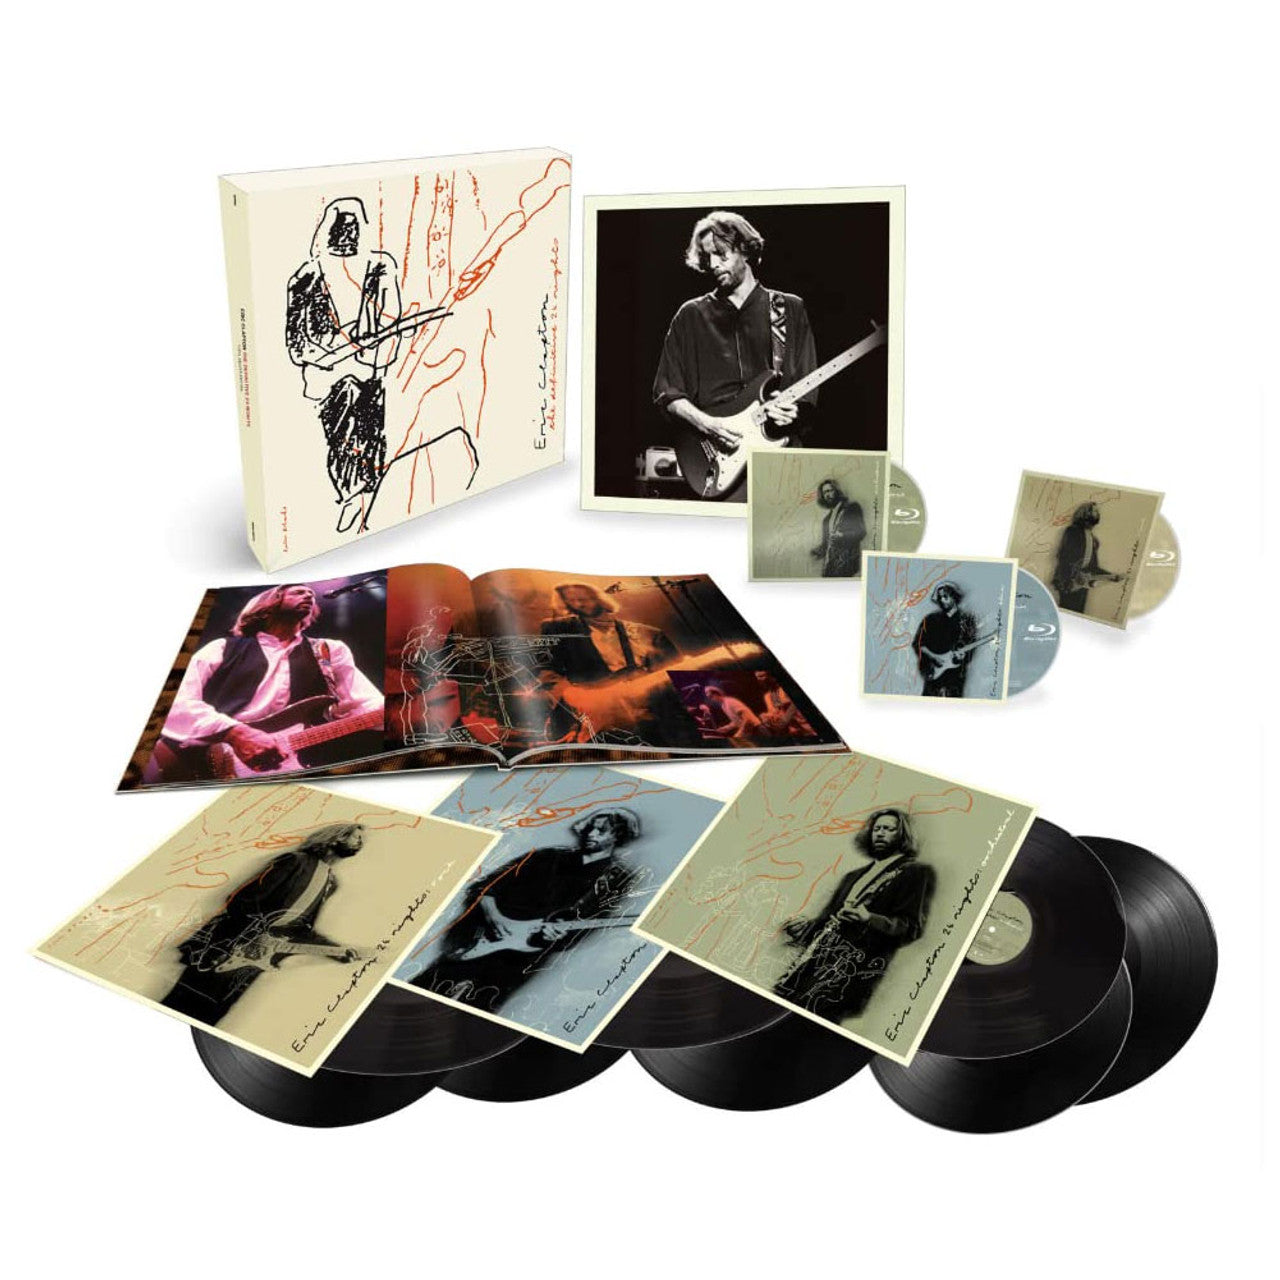 Eric Clapton - The Definitive 24 Nights - Blu Ray & LP Boxed Set